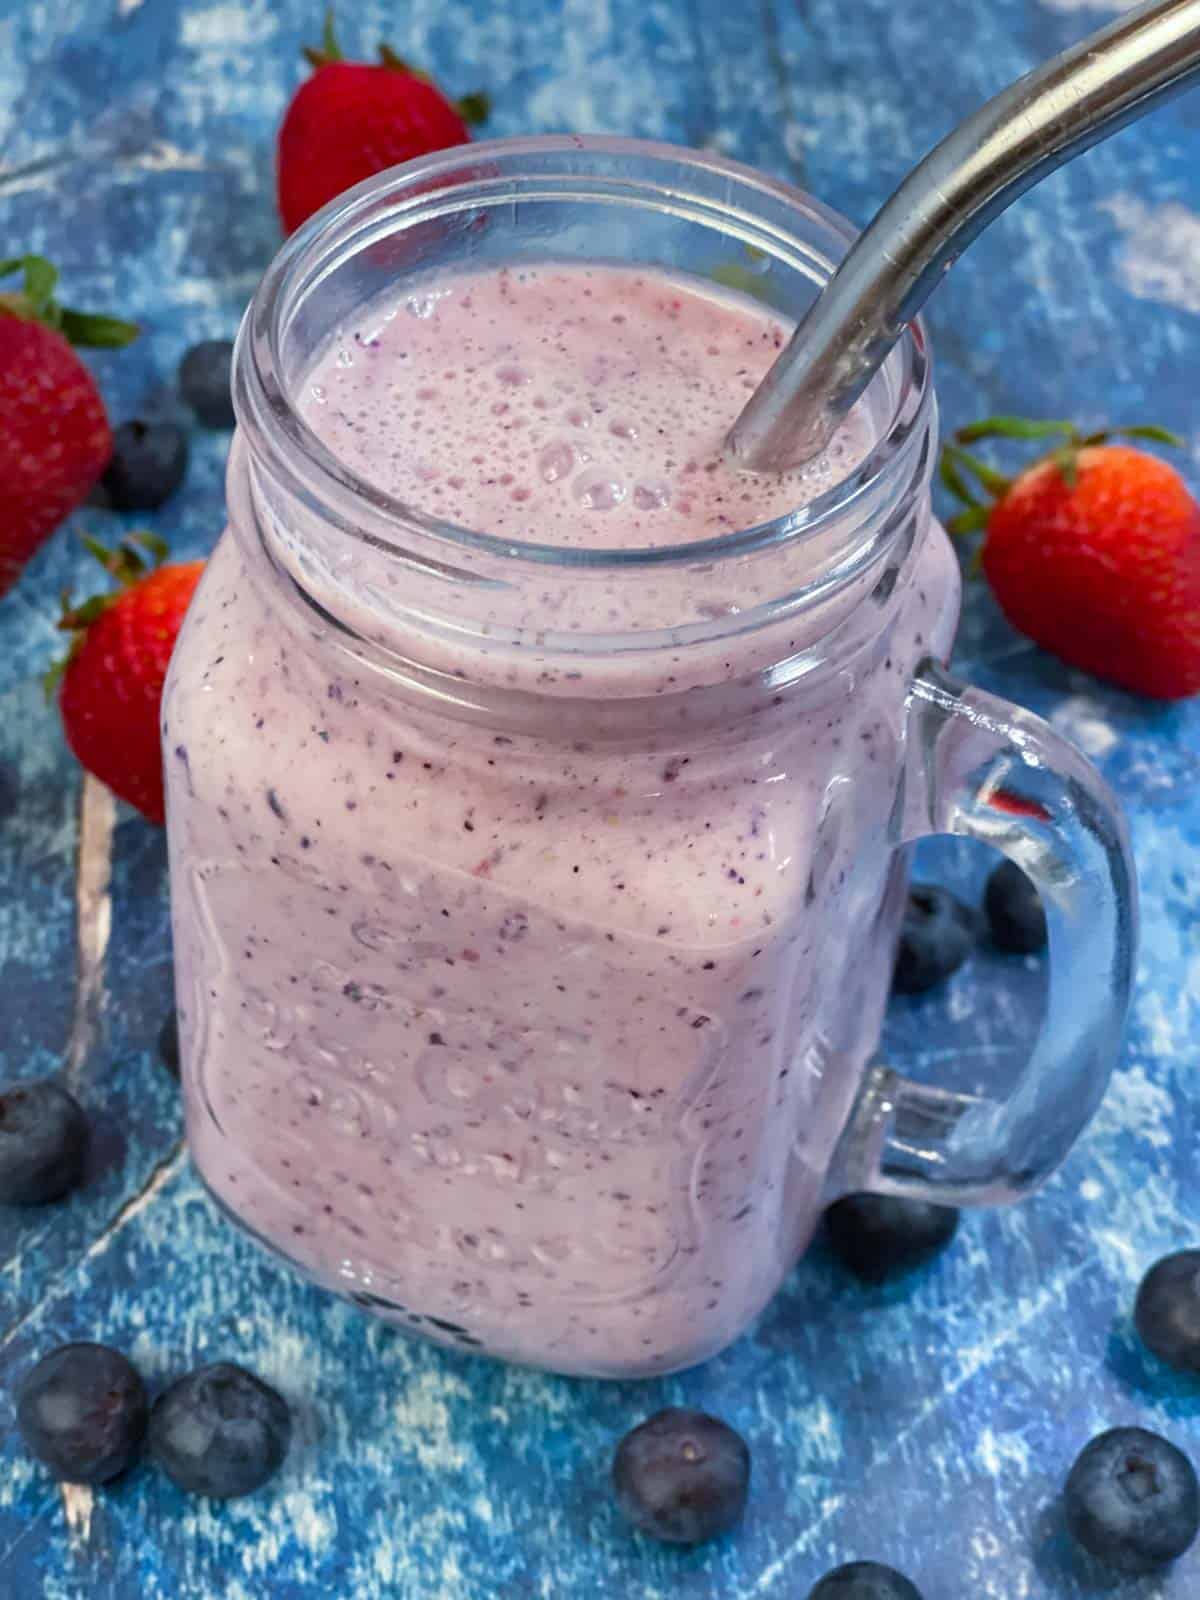 Strawberry Blueberry Smoothie served in a glass jar with strawberries and blueberries on the side